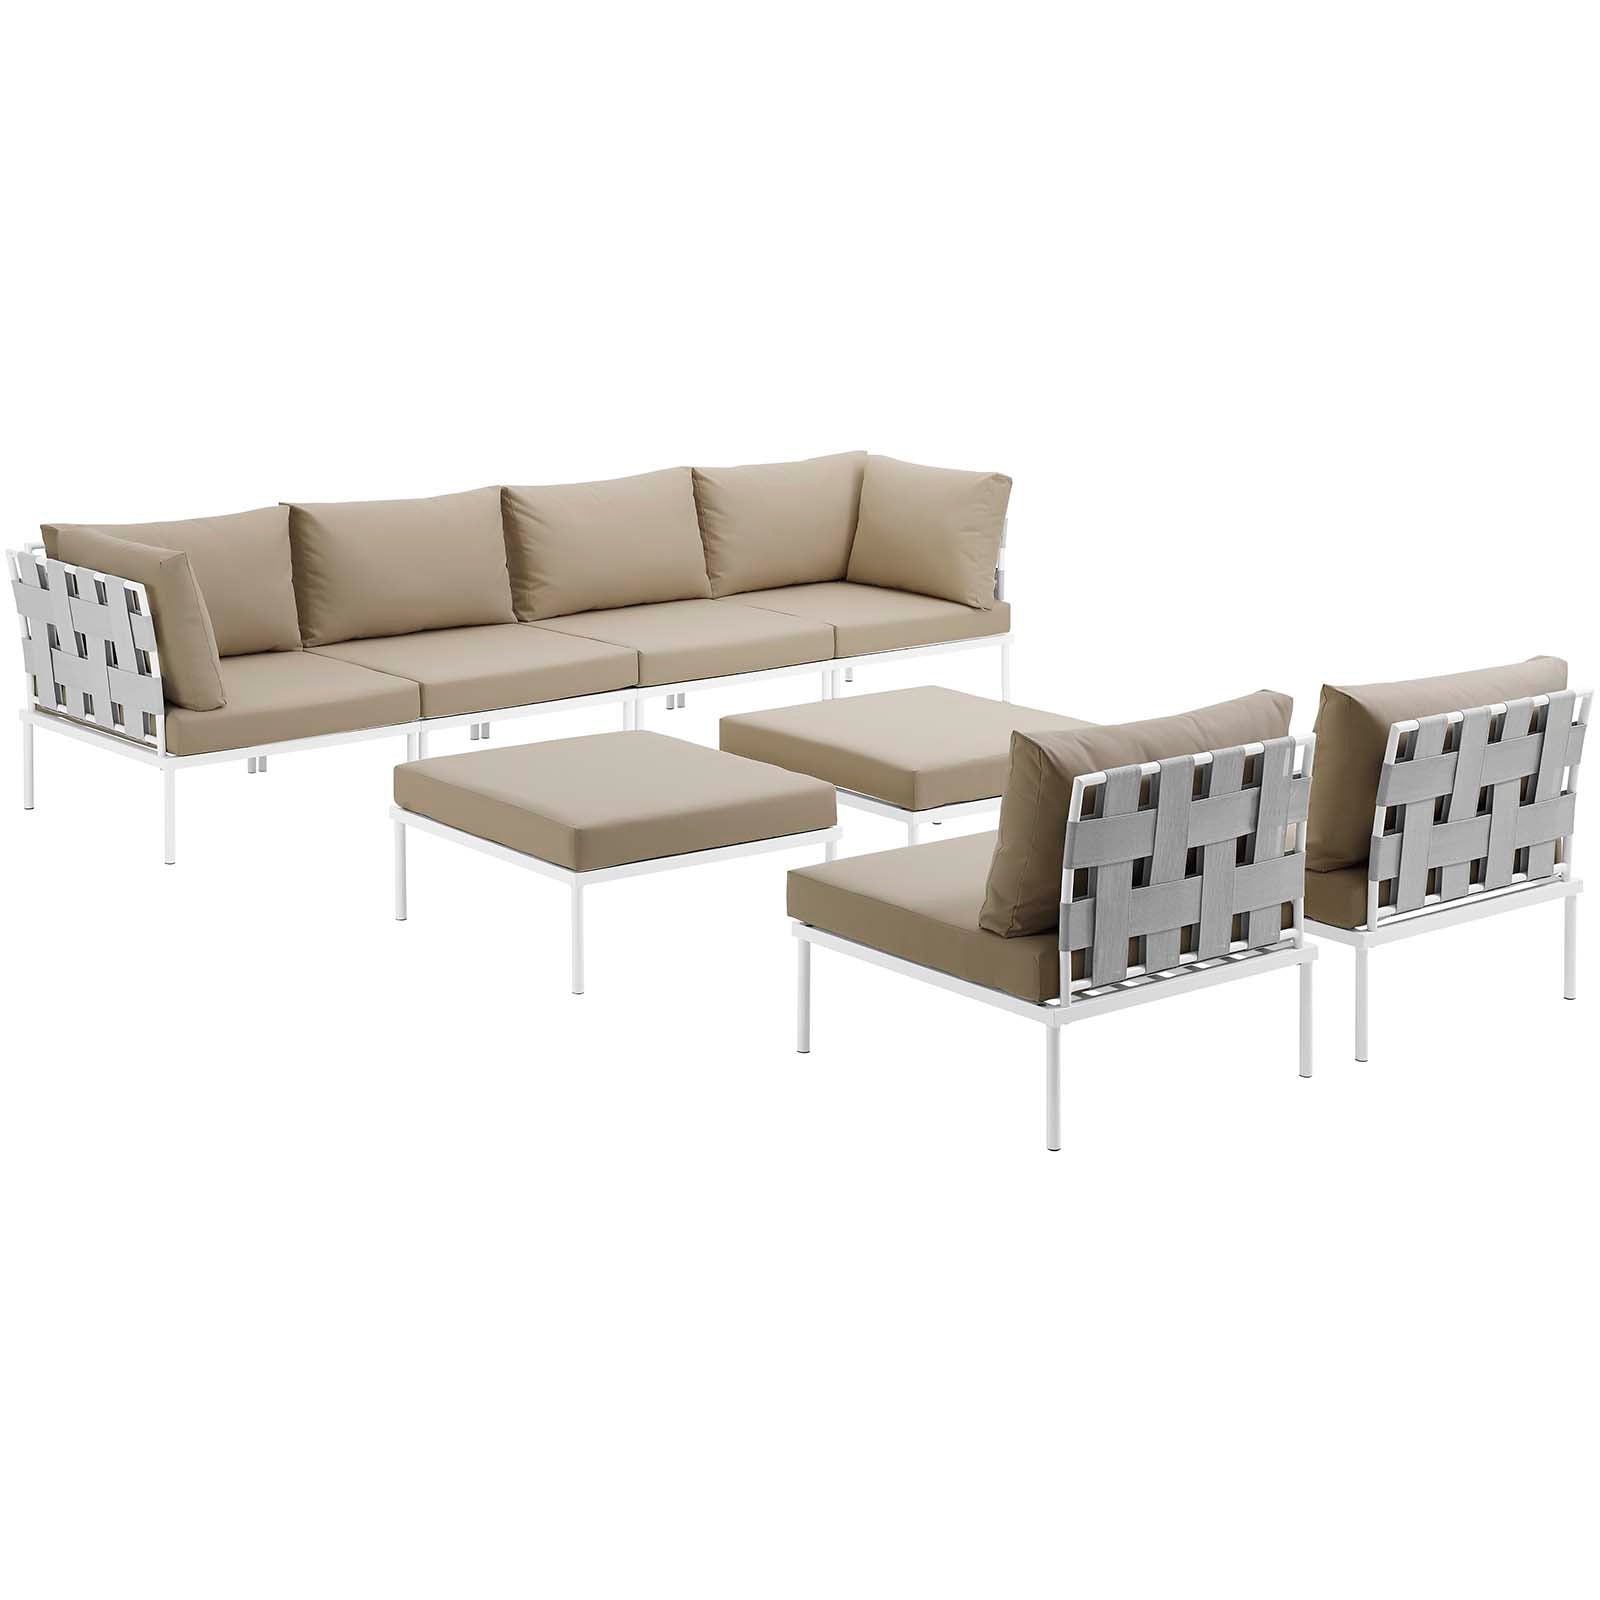 Modway Outdoor Conversation Sets - Harmony 8 Piece Outdoor 198"W Patio Aluminum Sectional Sofa Set Whit